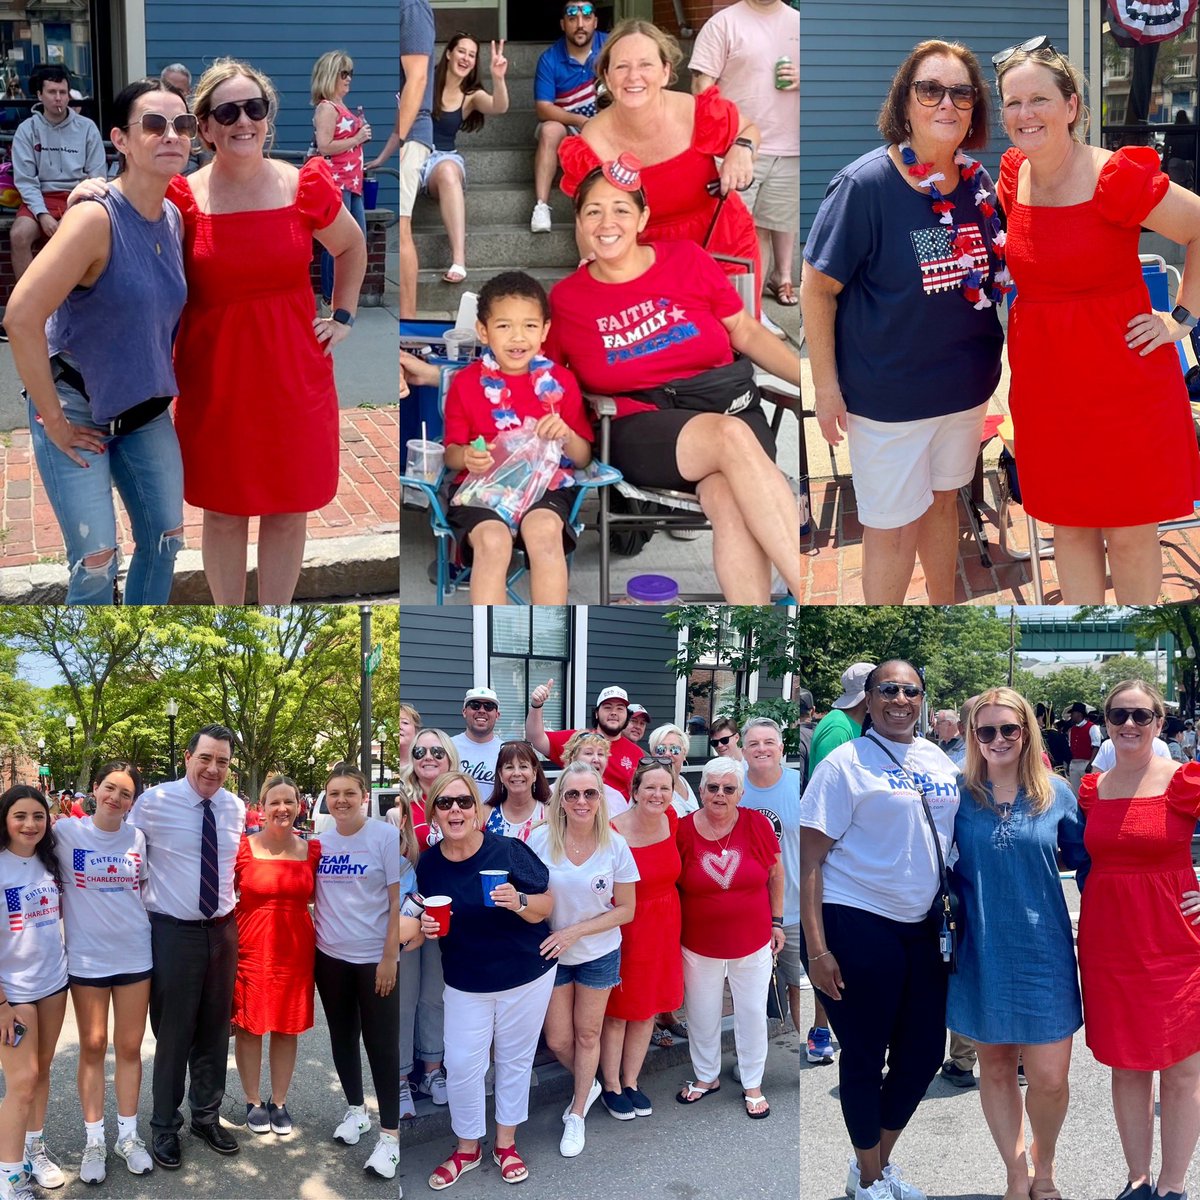 Pretty much sums up the Bunker Hill Parade today! ❤️🇺🇸 Saw so many friends along the route! Thank you Charlestown! (more photos soon😀) #TeamMurphy #bunkerhillday #comingtogether #actionnotjustwords #bospoli